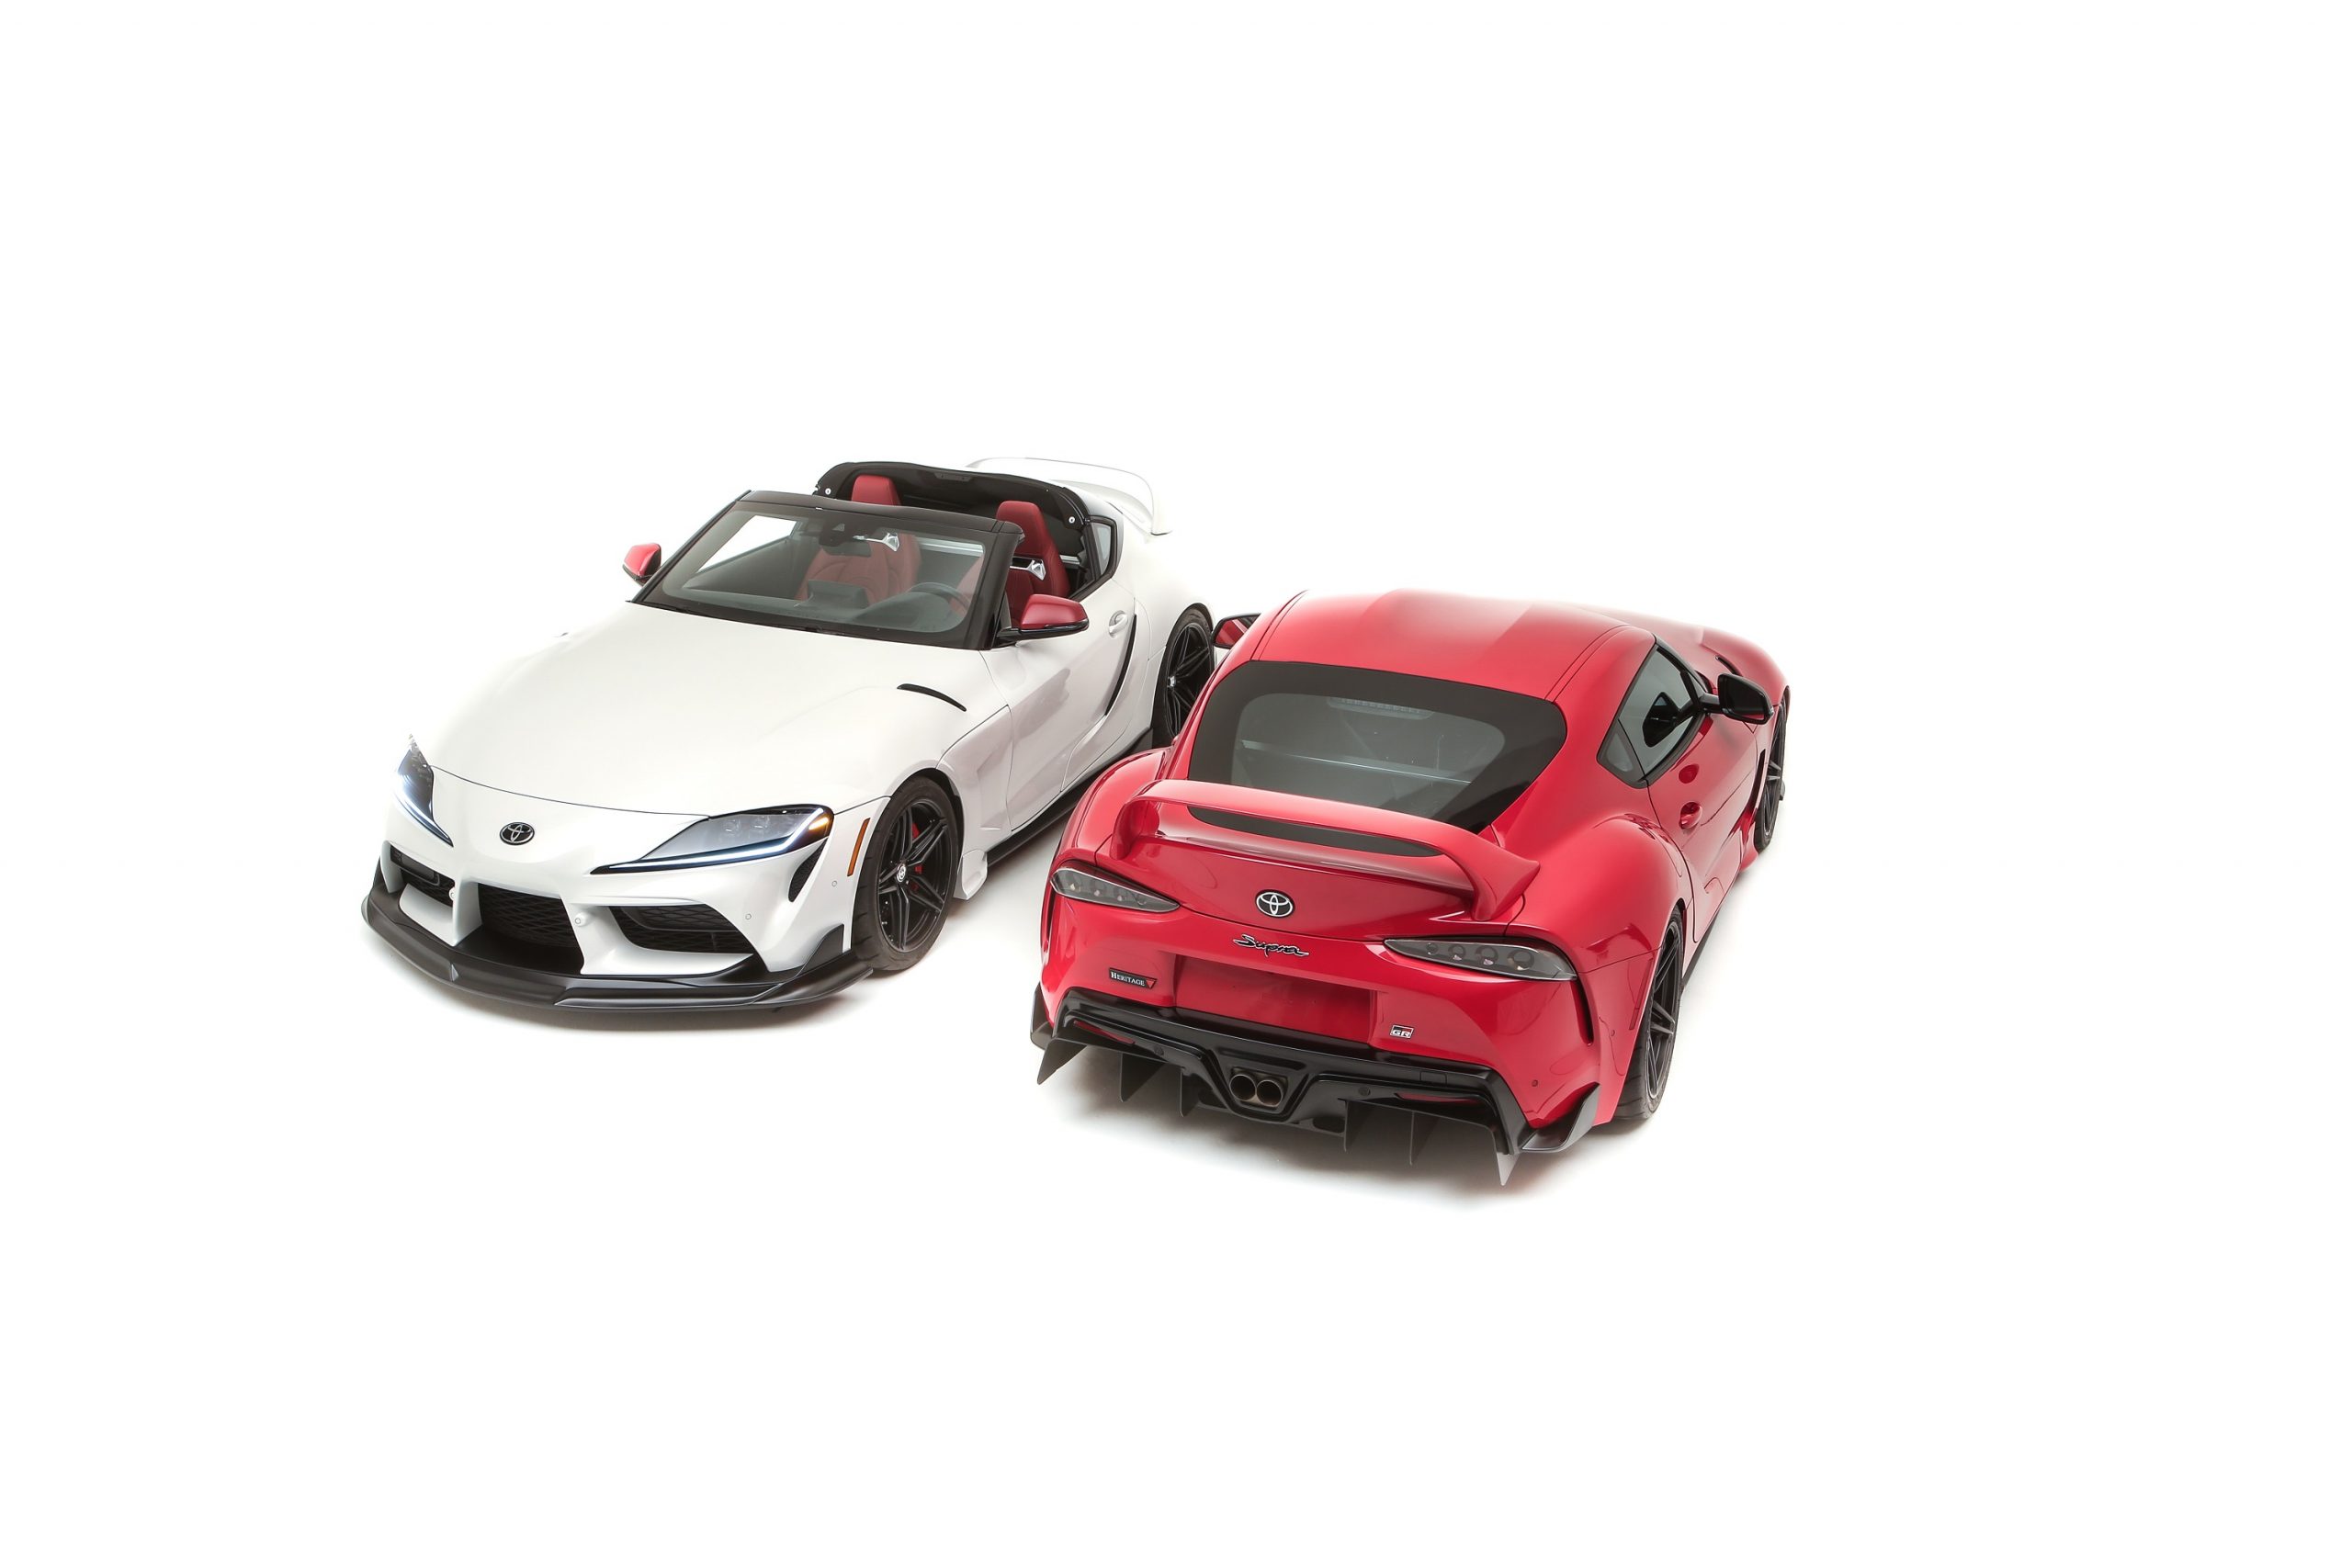 The front and rear of two new Toyota Supra Heritage models in white and red respectively, one a targa and one a coupe